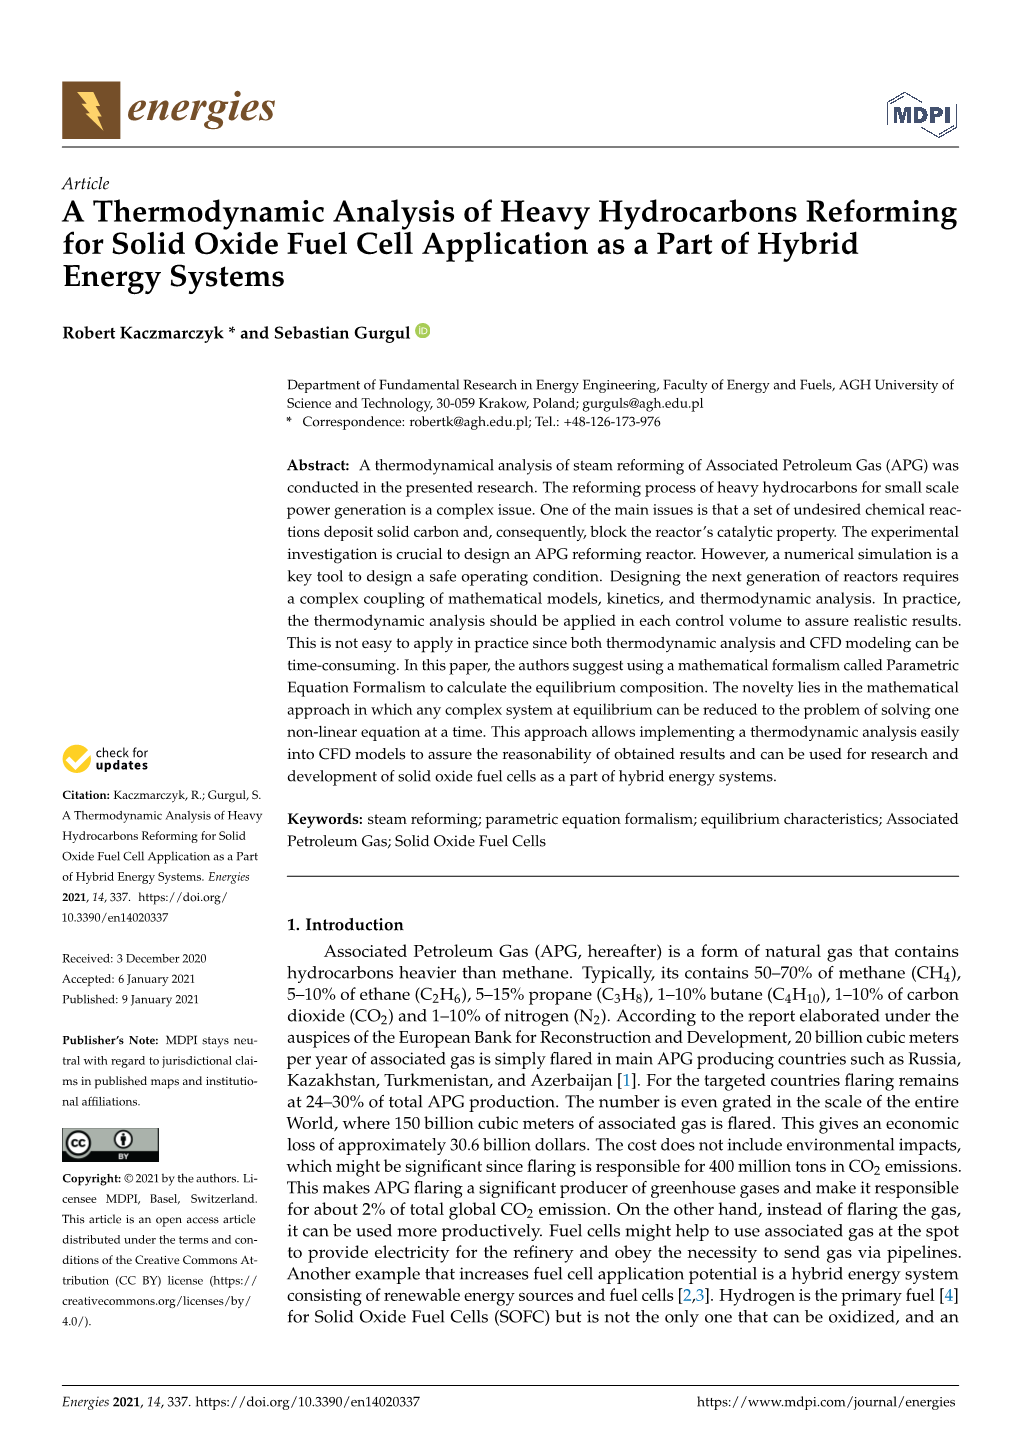 A Thermodynamic Analysis of Heavy Hydrocarbons Reforming for Solid Oxide Fuel Cell Application As a Part of Hybrid Energy Systems